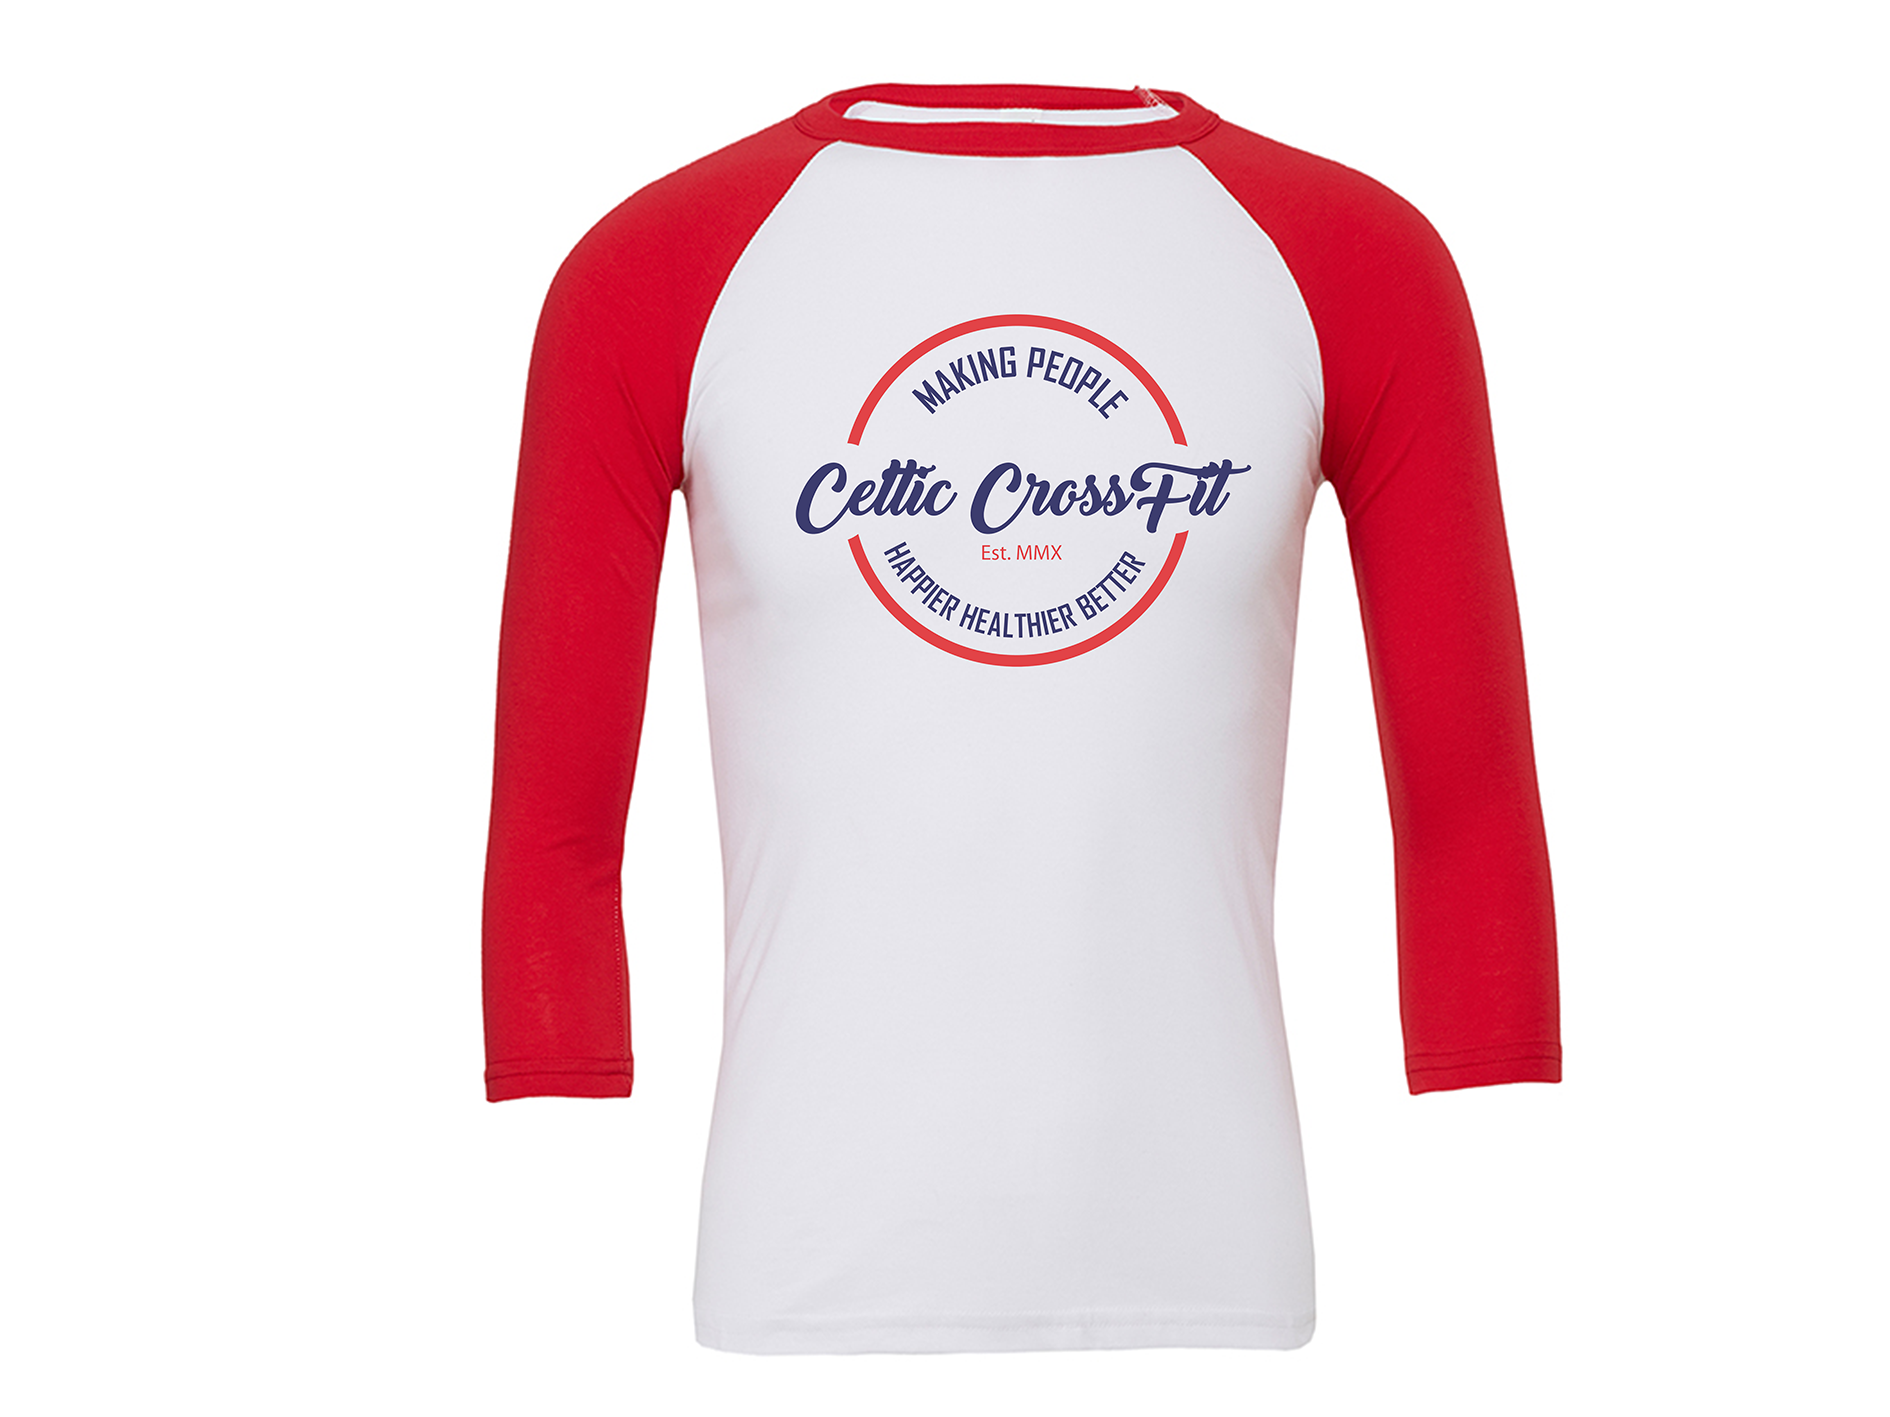 Celtic CrossFit | 3/4 Sleeve | Red/White